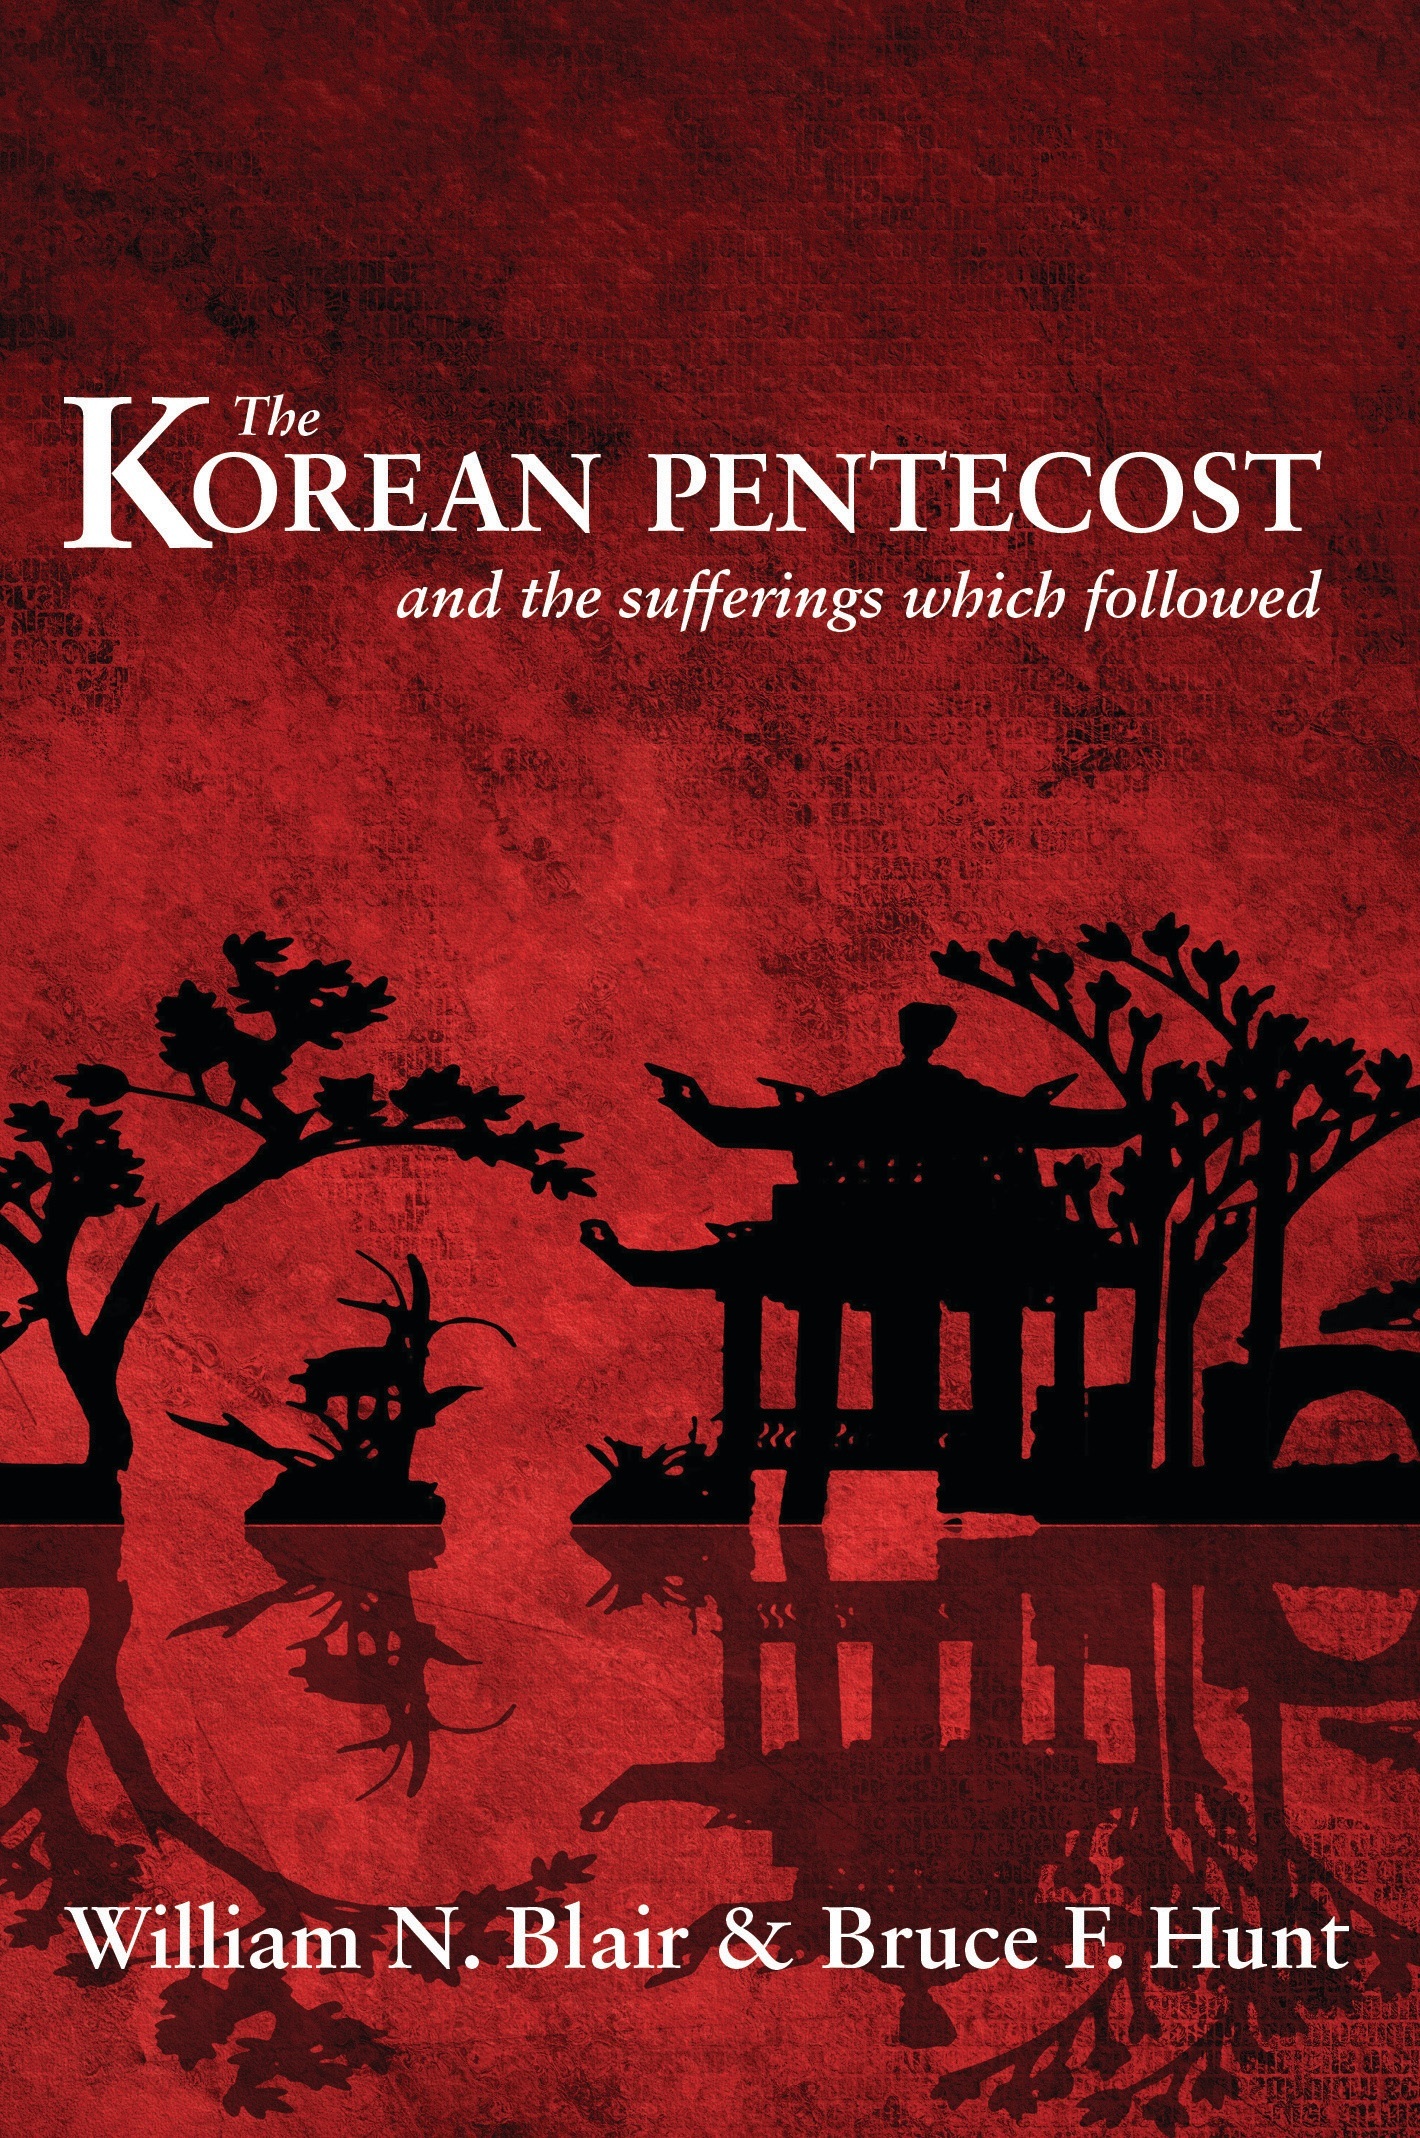 Cover image for the book 'Korean Pentecost' by William Blair and Bruce Hunt